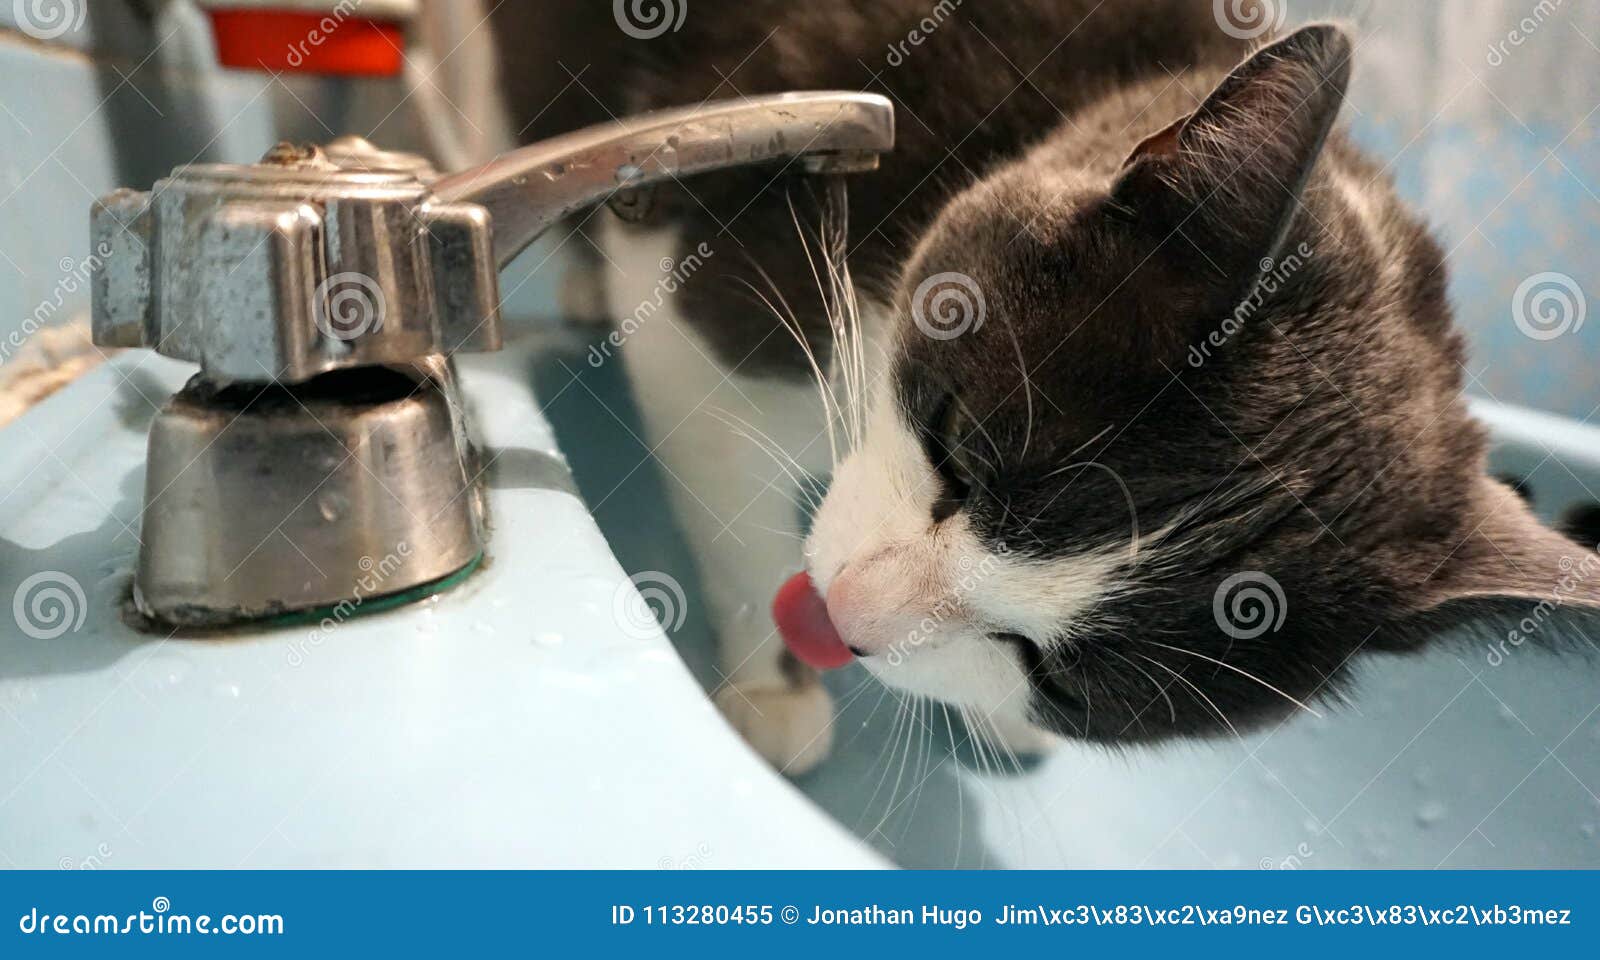 Cat Drinking From A Faucet Stock Image Image Of House 113280455